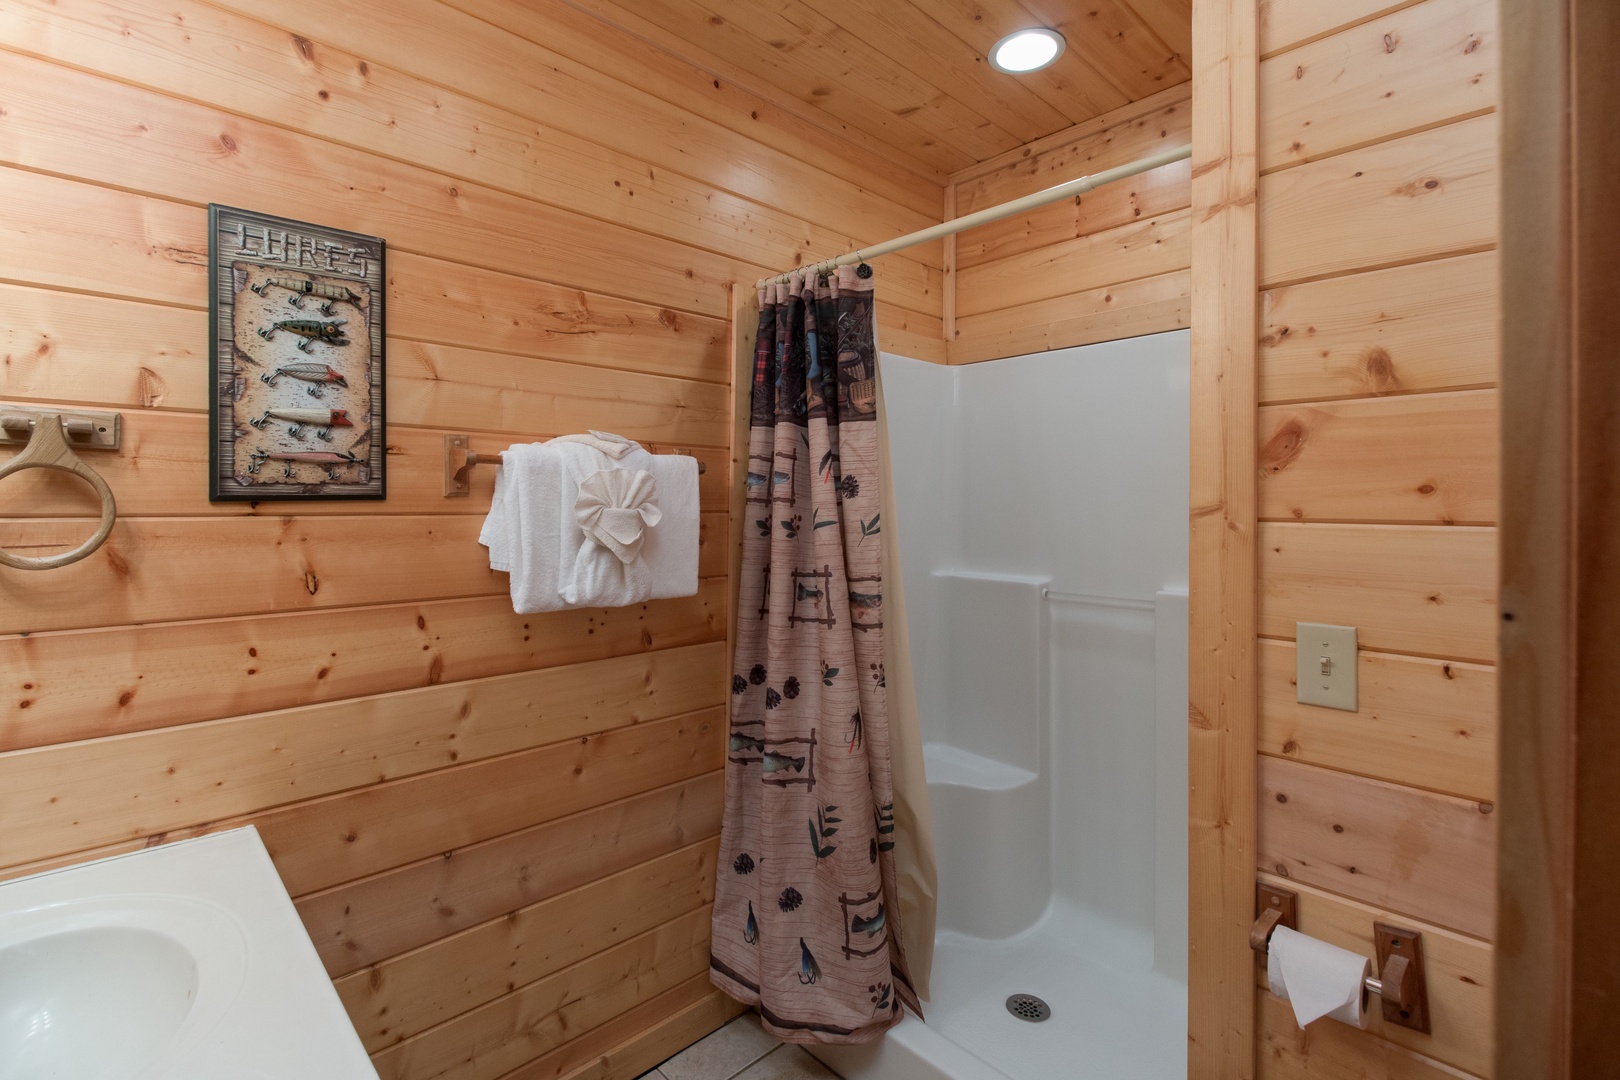 Shower at Family Ties Lodge, a 4 bedroom cabin rental located in pigeon forge